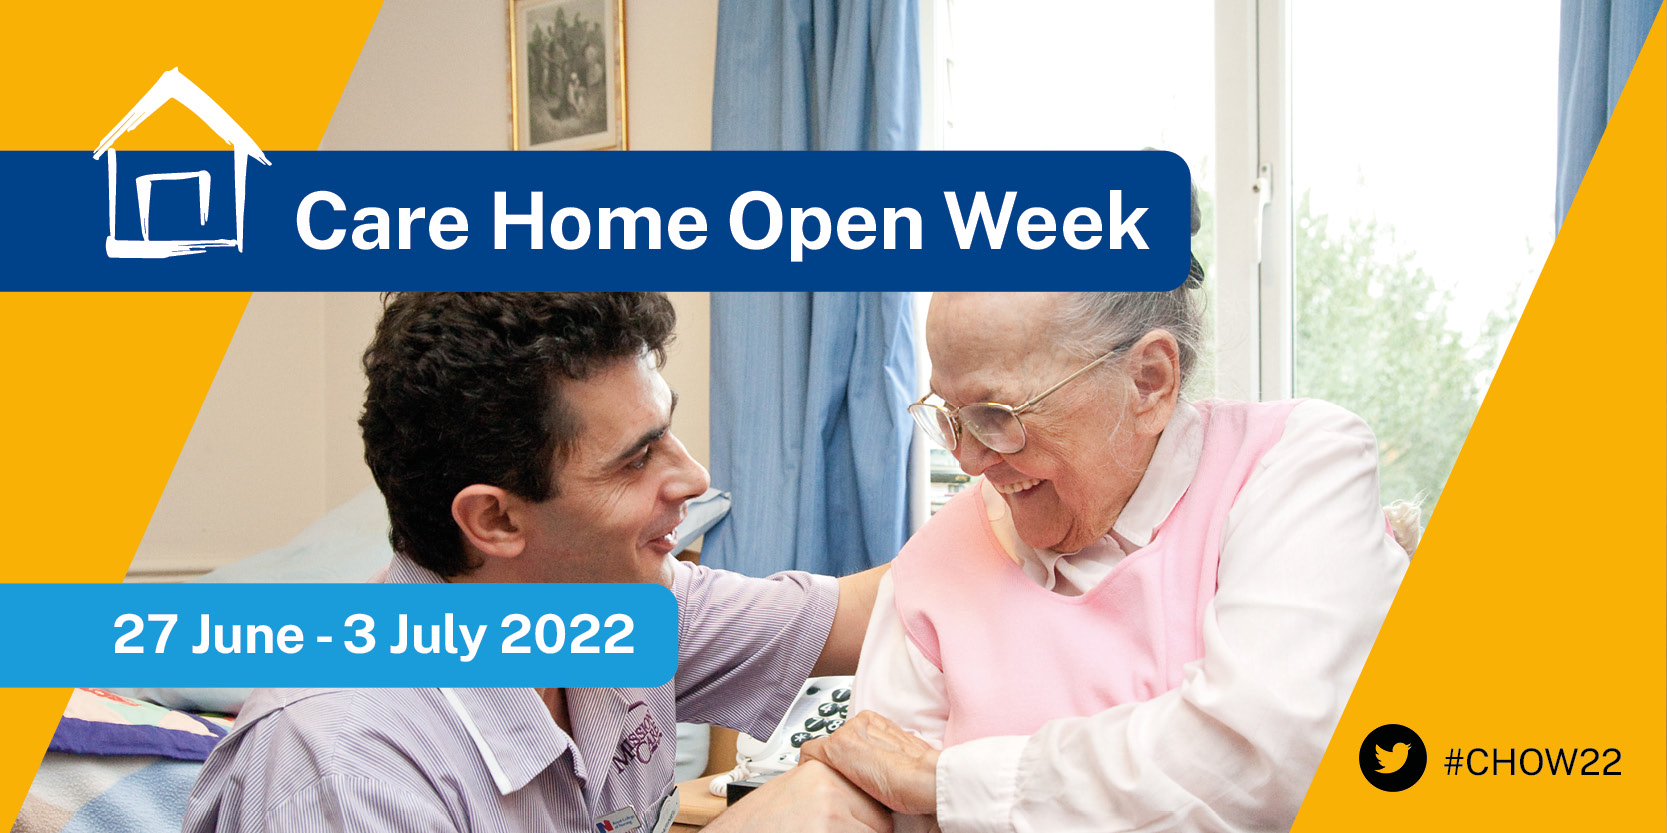 Member of staff with resident in care home and dates of Care Home Open Week 2022